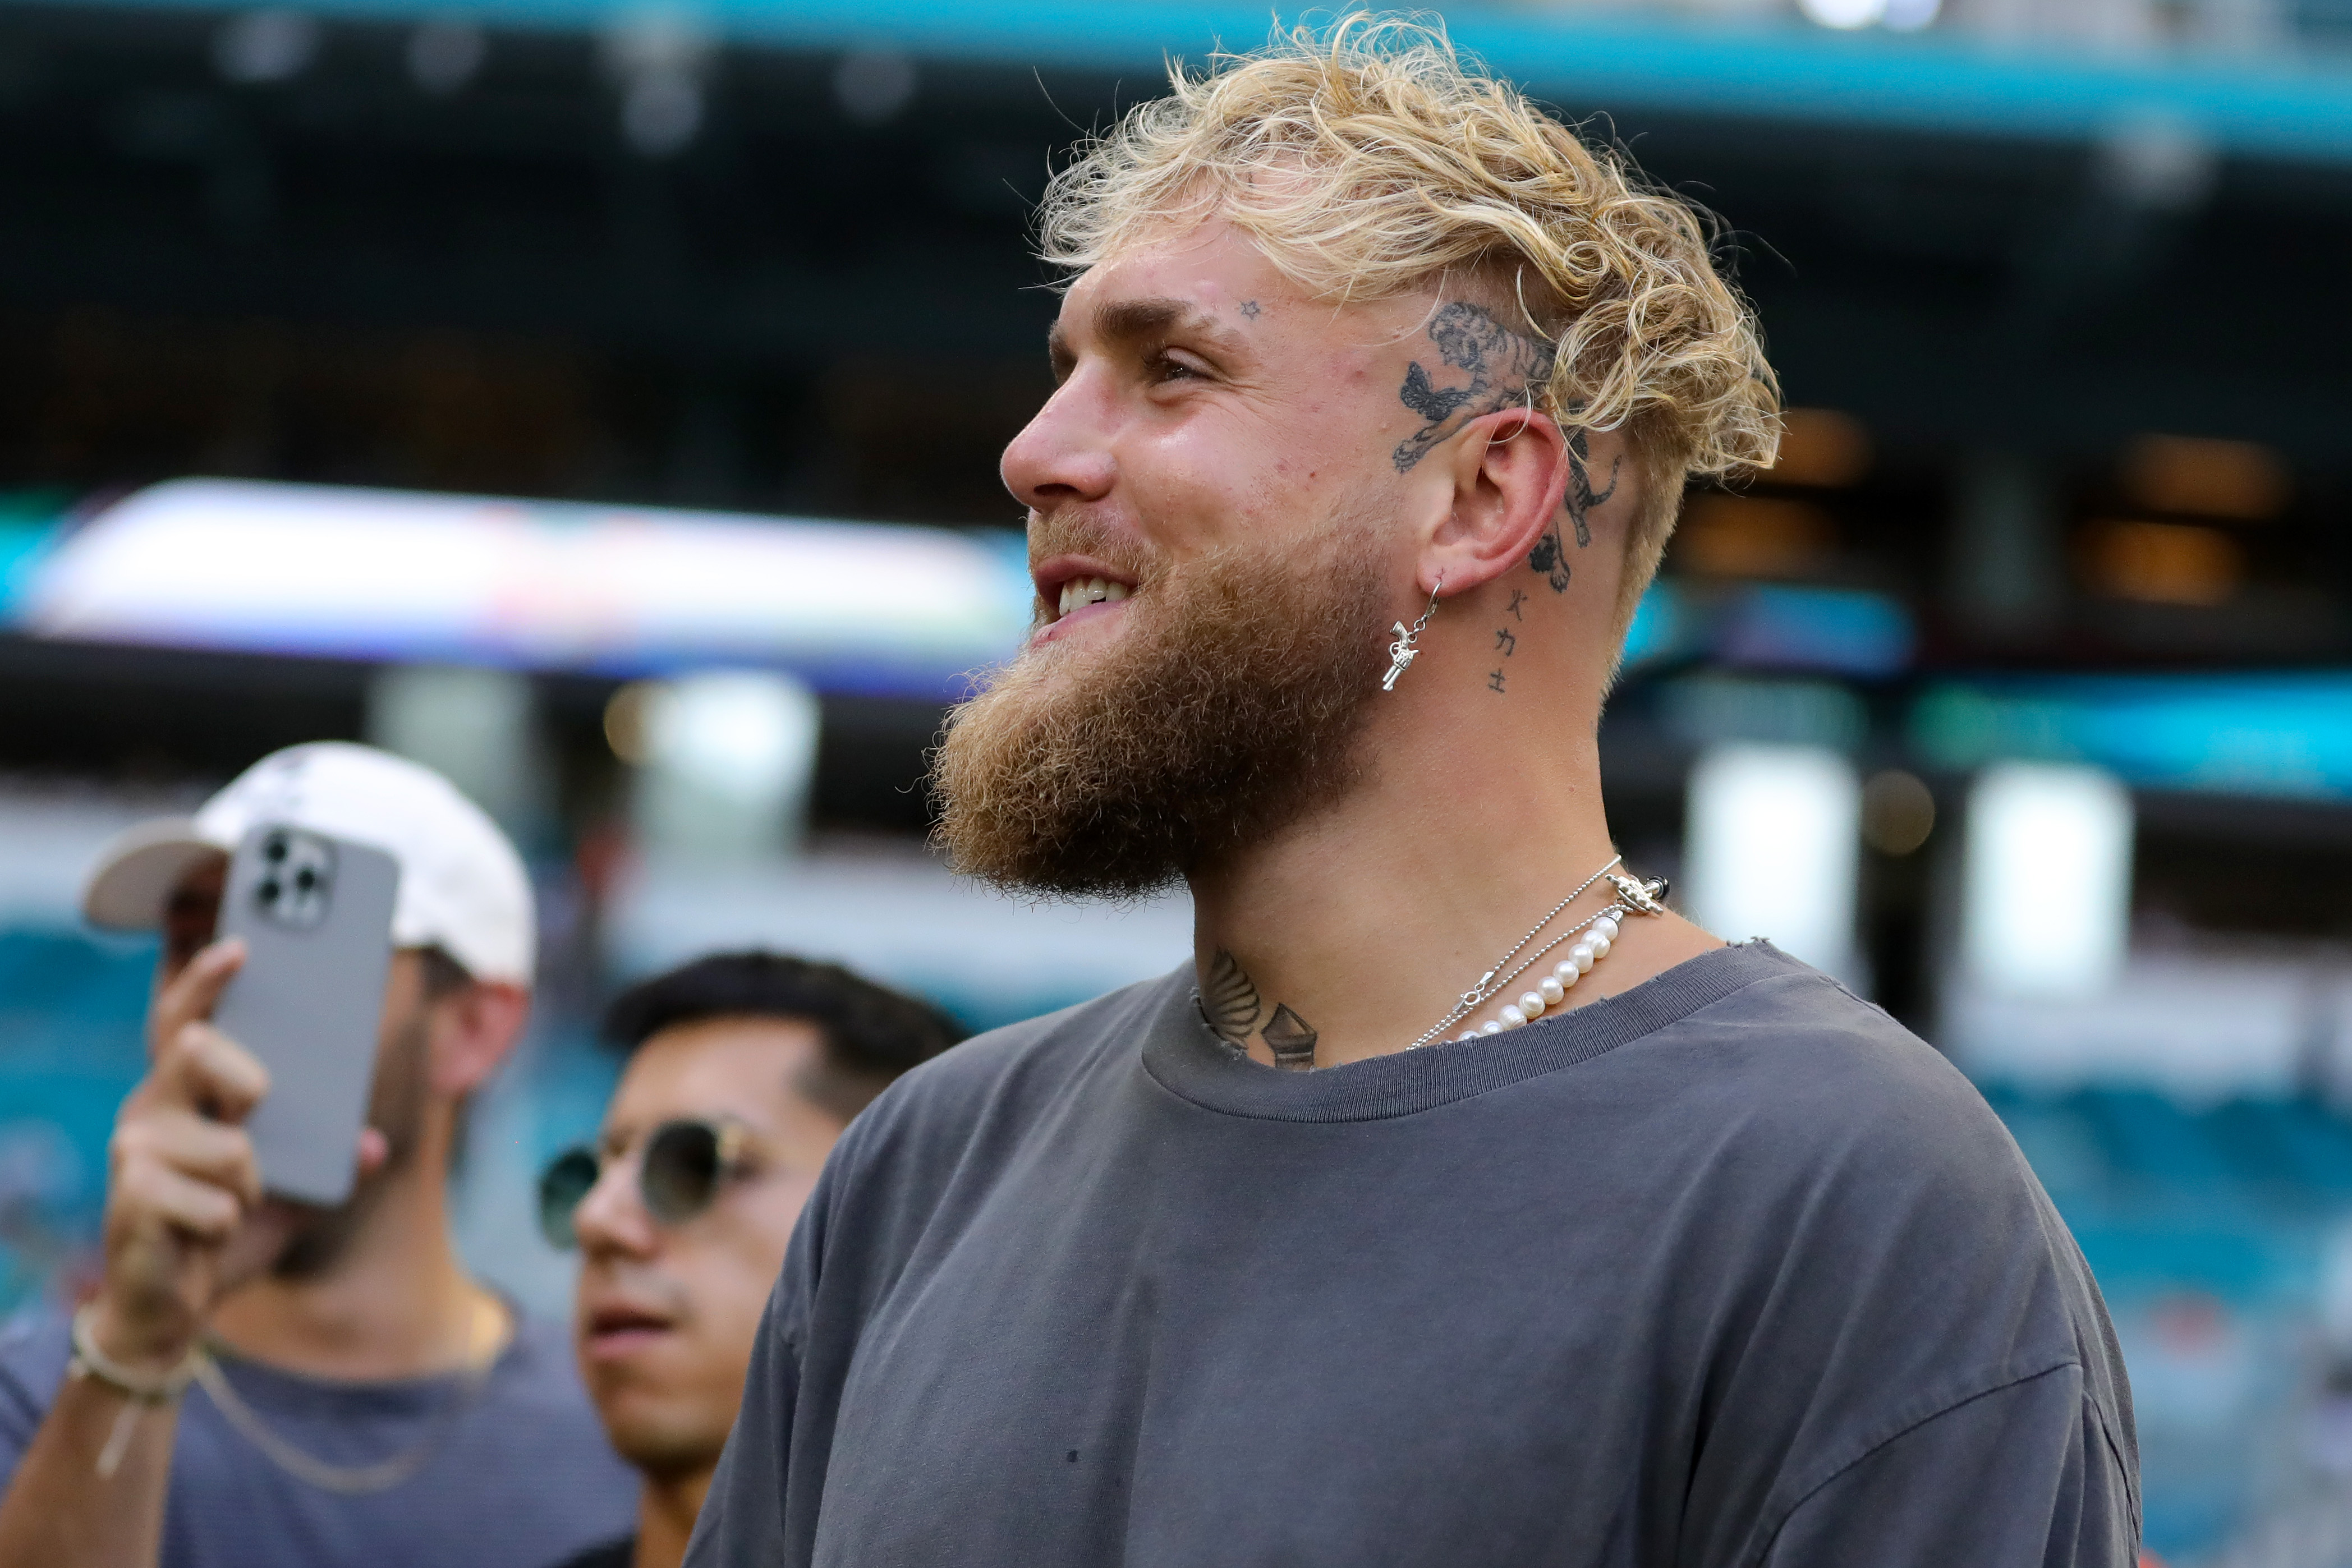 Jake Paul attends a game between the Houston Texans and Miami Dolphins at Hard Rock Stadium on November 27, 2022 in Miami Gardens, Florida.